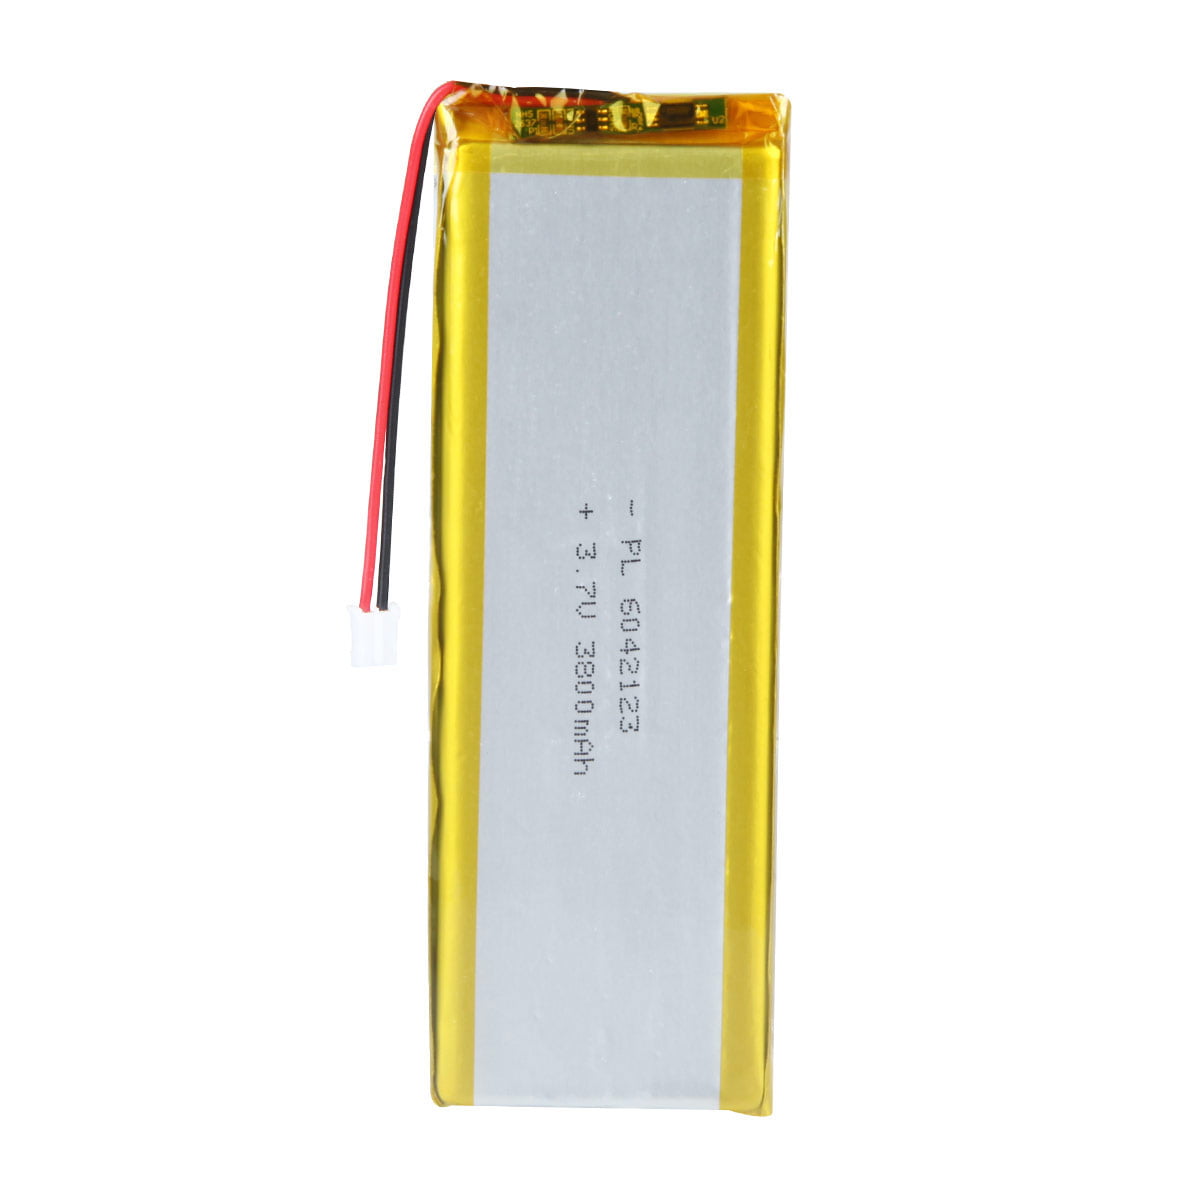 BLS-12/24BW Battery Life Saver for 12 & 24 volt Solar and Wind Battery Banks 